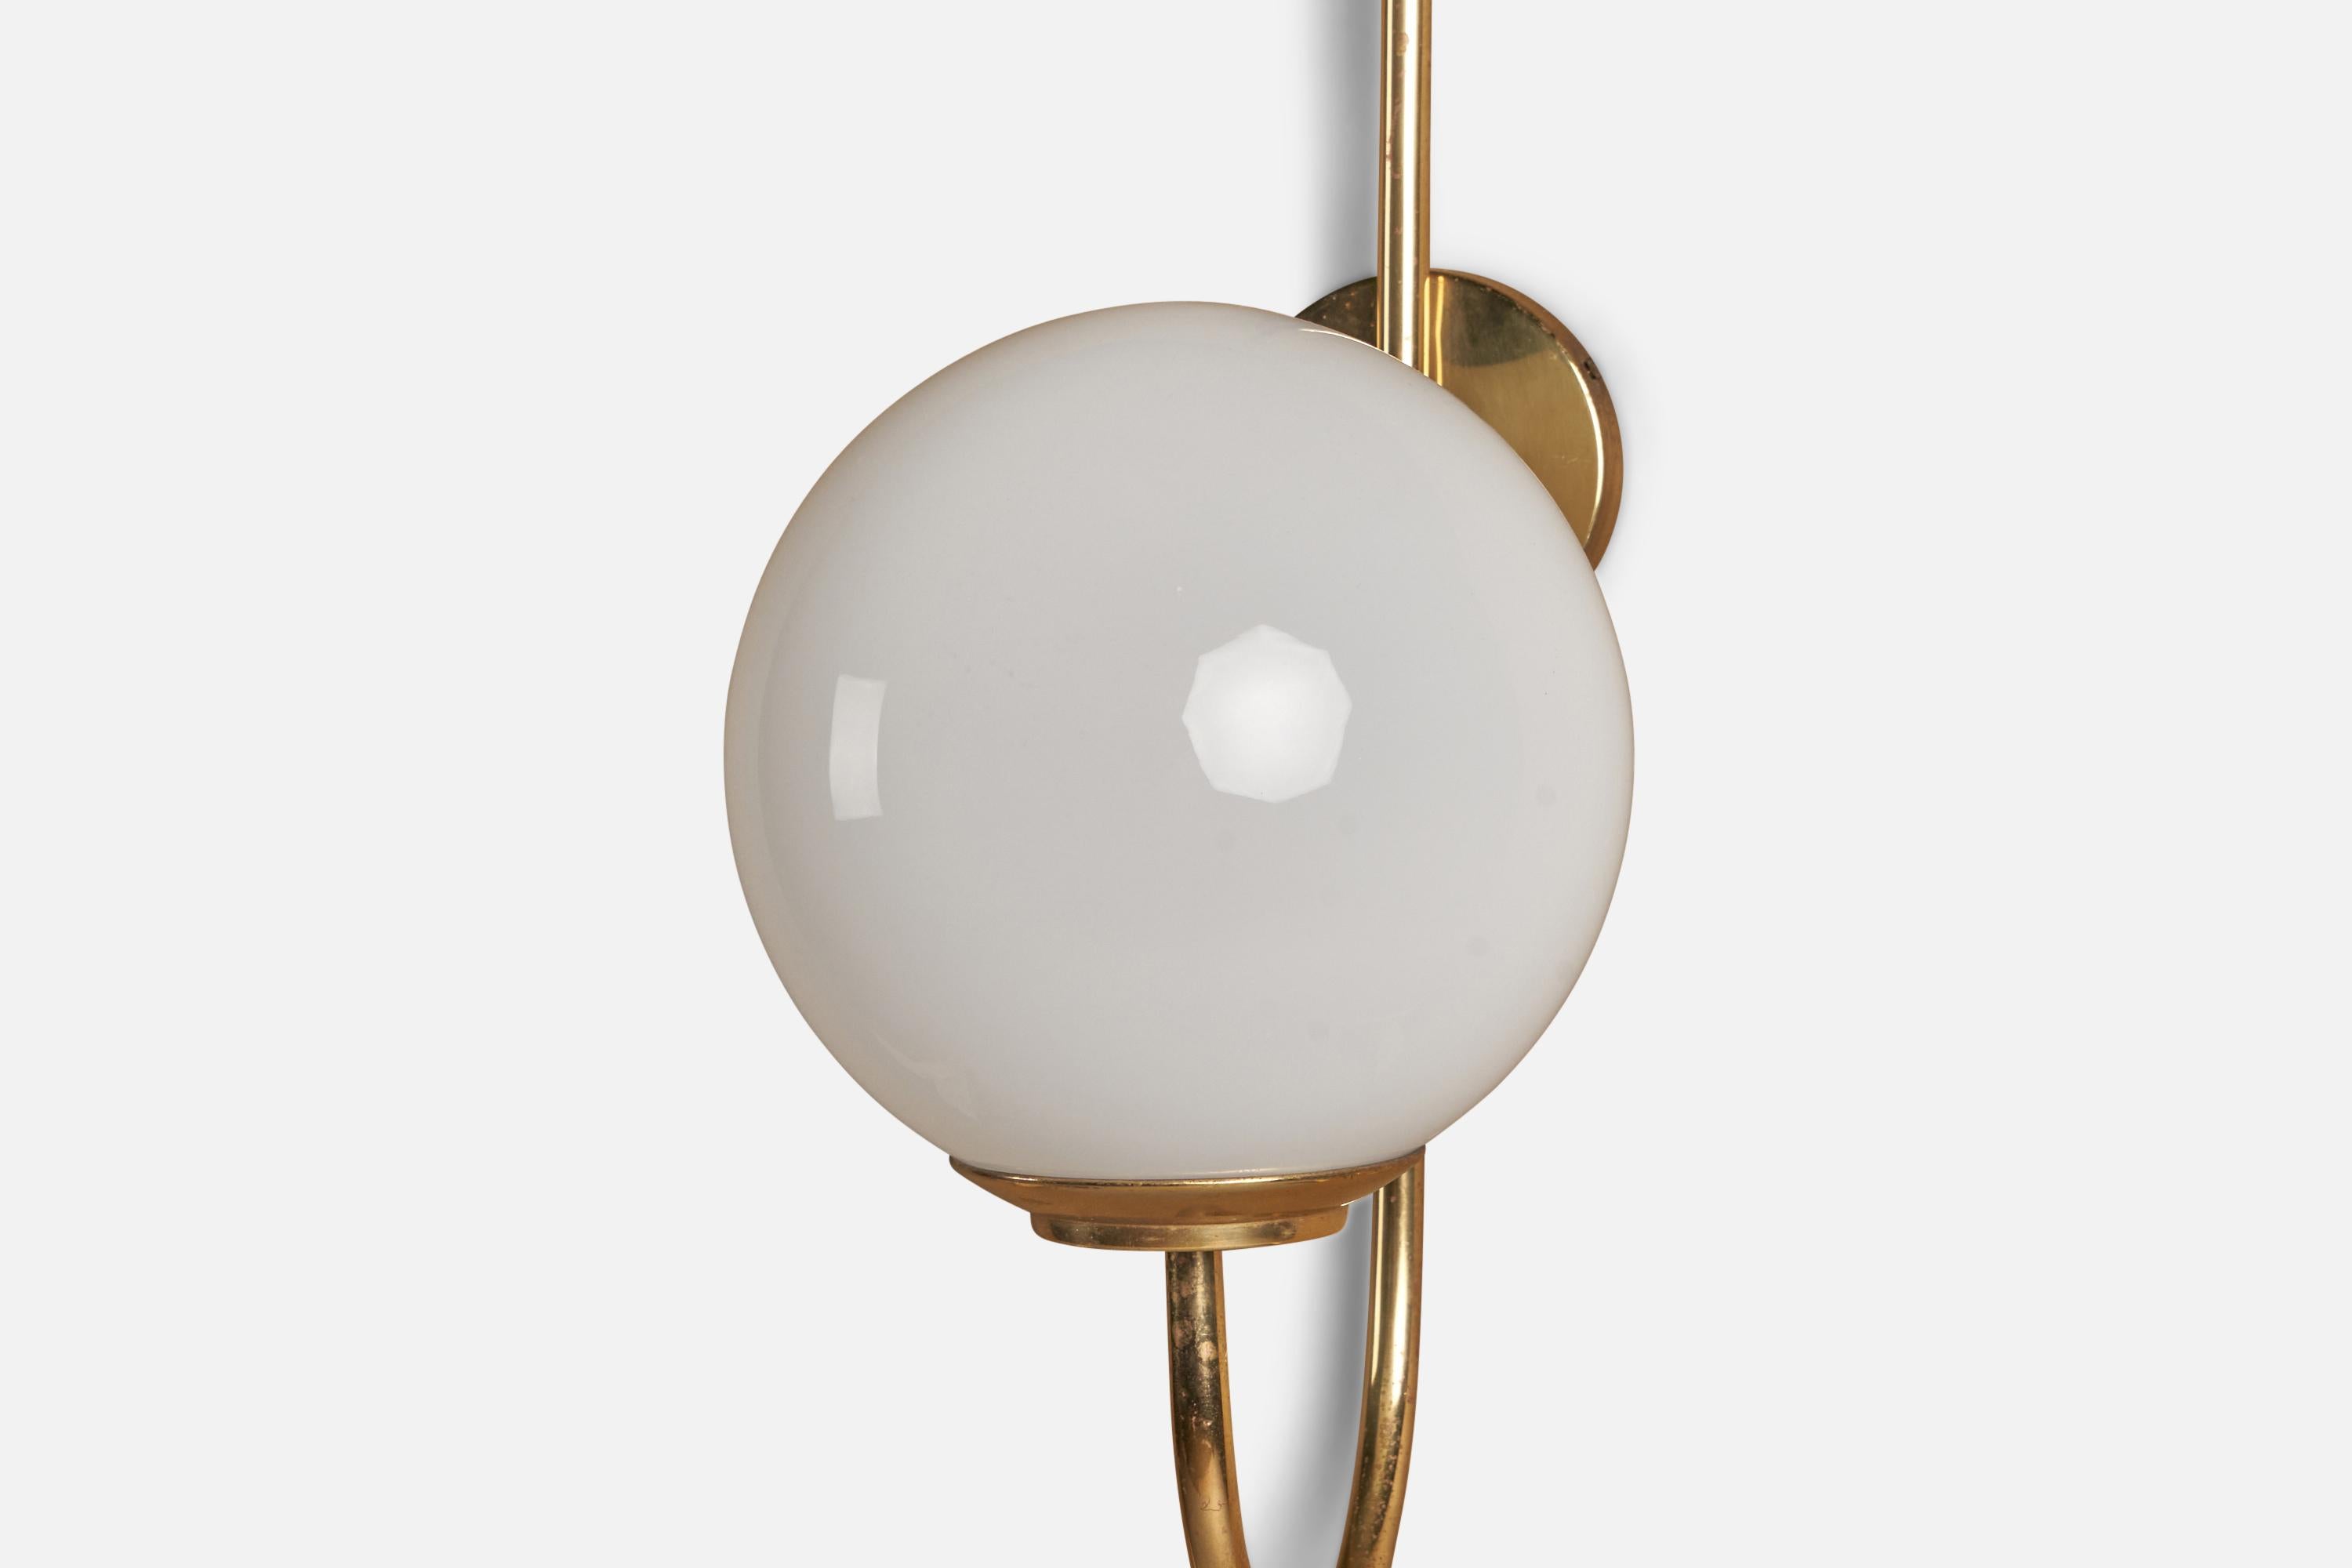 Mid-20th Century Luigi Caccia Dominioni, Sizeable Wall Lights, Brass, Glass, Italy, 1950s For Sale